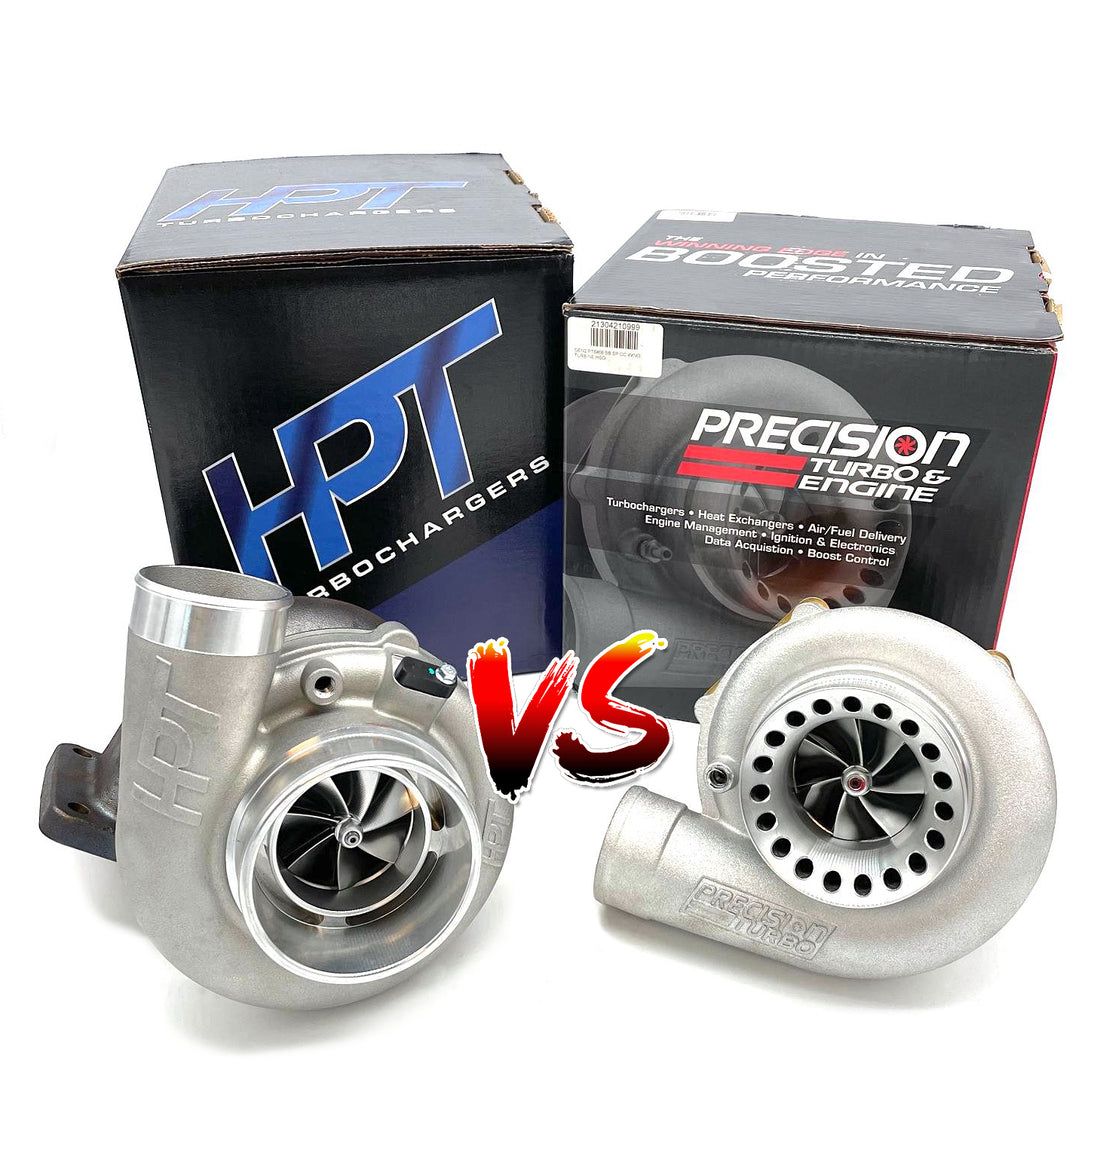 Turbo Test: How does the Precision Gen 2 6466 stack up against the all new HPT F2 6466?